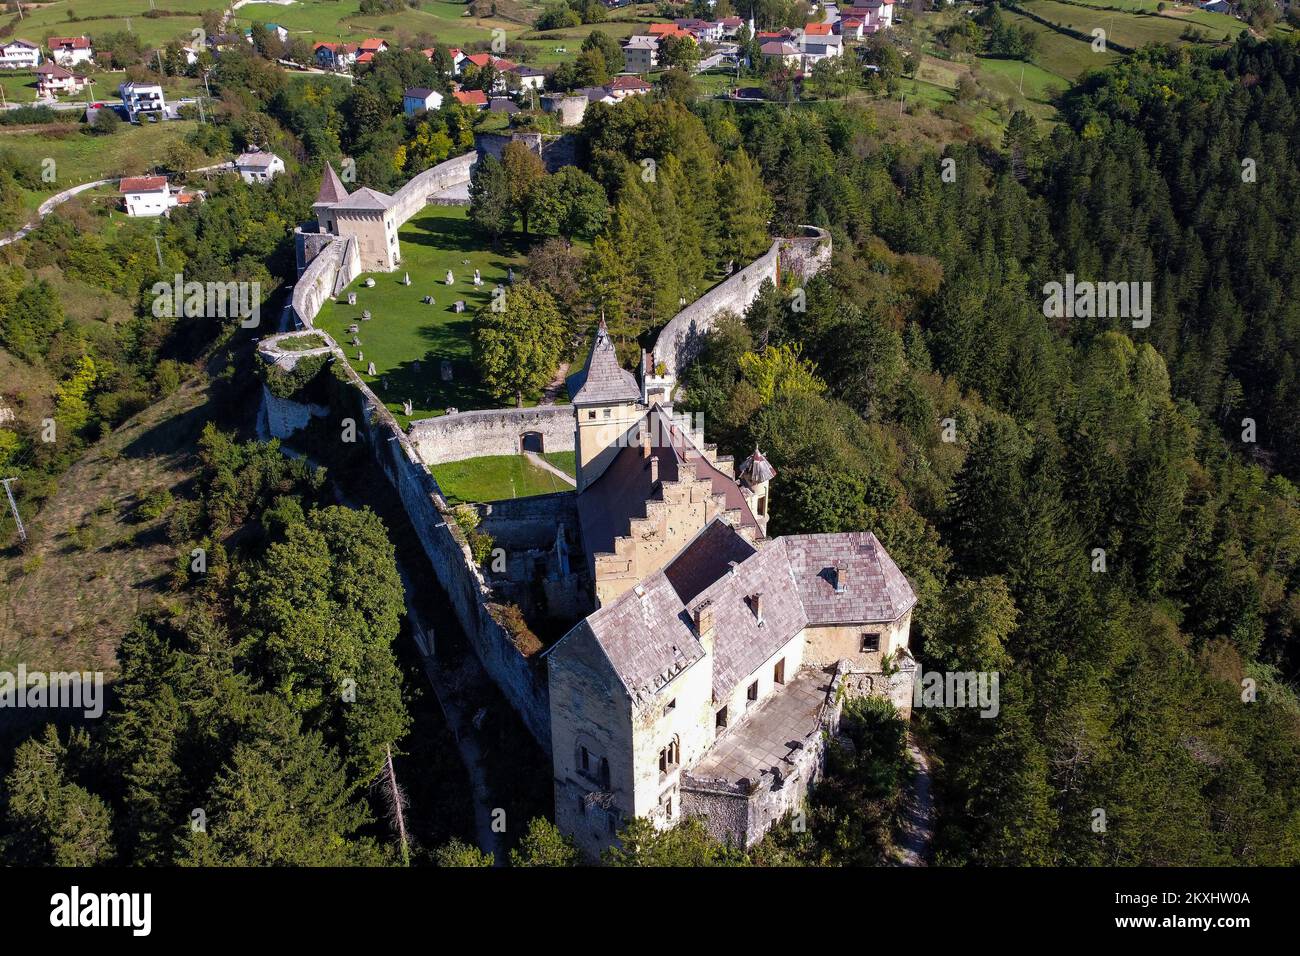 View of the Old Town Ostrozac, in Cazin, Bosnia and Herzegovina, on Sep. 24, 2020.Ostrozac Castle is a castle located in Bosnia and Herzegovina in the Una-Sana Canton just outside the town of Cazin, in the village of Ostrozac. The castle dates back to the 13th century when Ostrozac was part of property of the noble house of Babonic family. In 1592 it was captured by the Ottoman Turks and established as an Ottoman province of Bosnia. The castle was built between 1900 and 1906 by Major of Bihac Lothar Von Berks as a birthday present for his wife, member of the Habsburg family. Ownership of the  Stock Photo